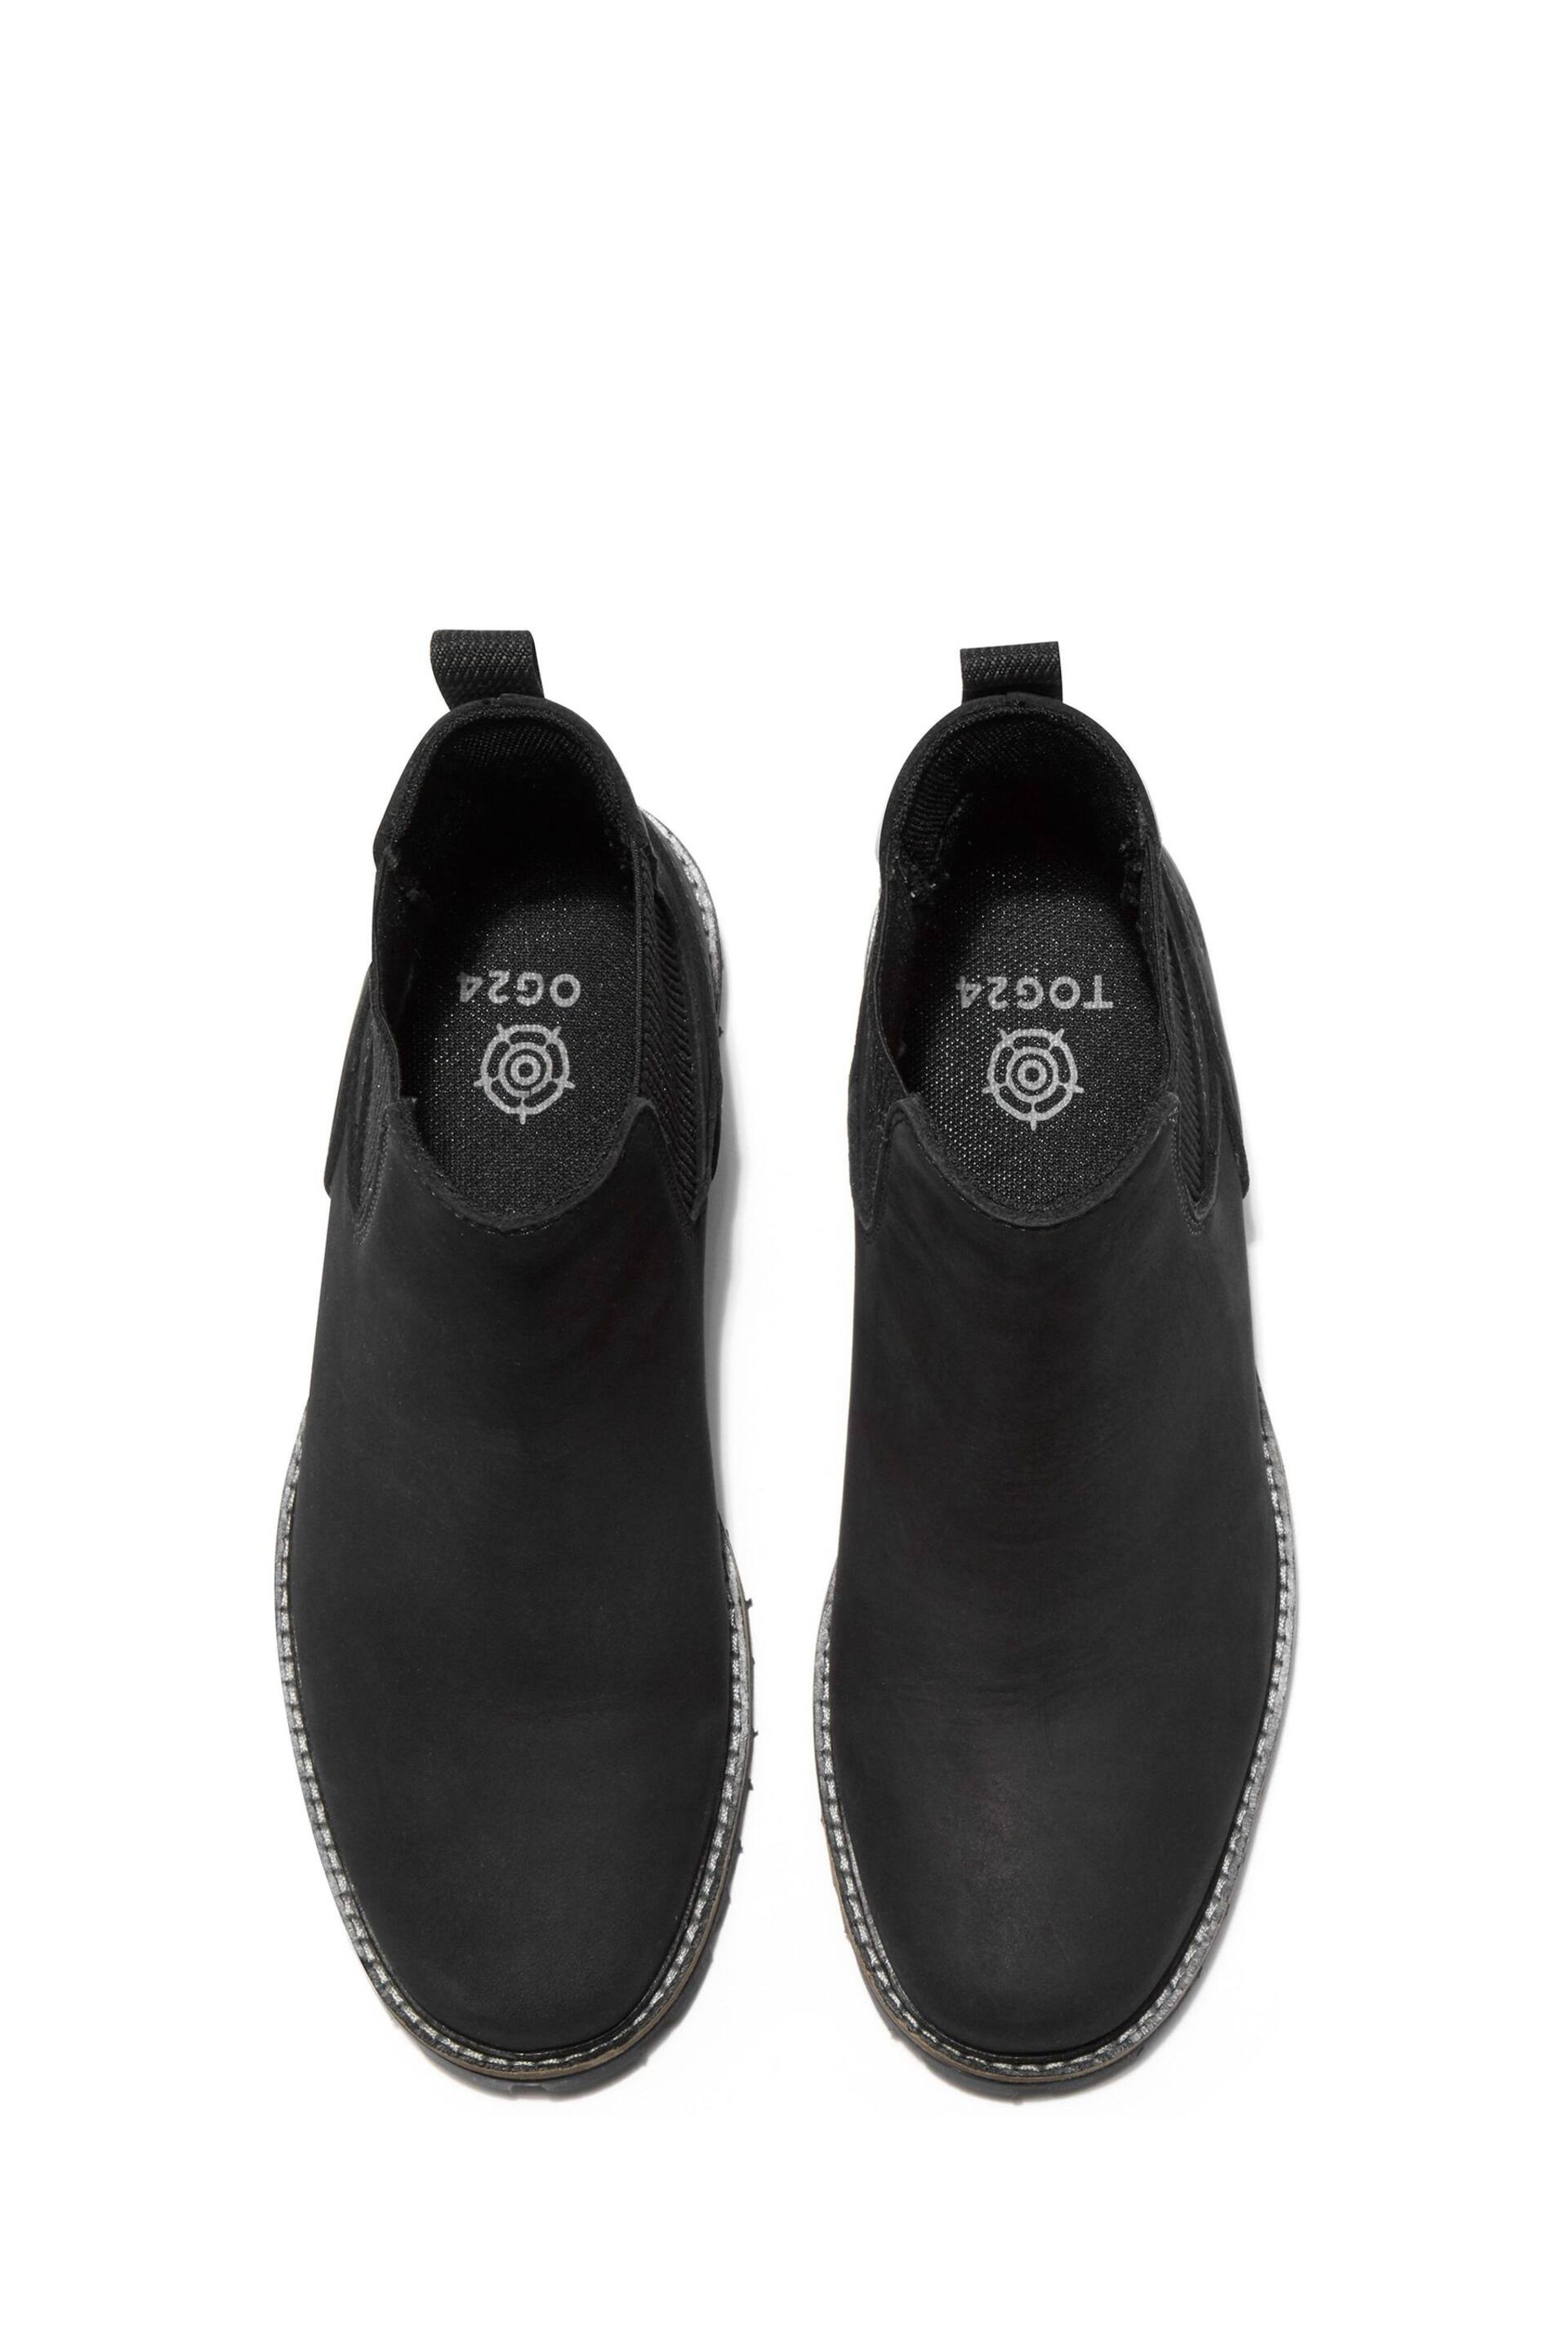 Tog 24 Black Canyon Chelsea Boots - Image 5 of 7